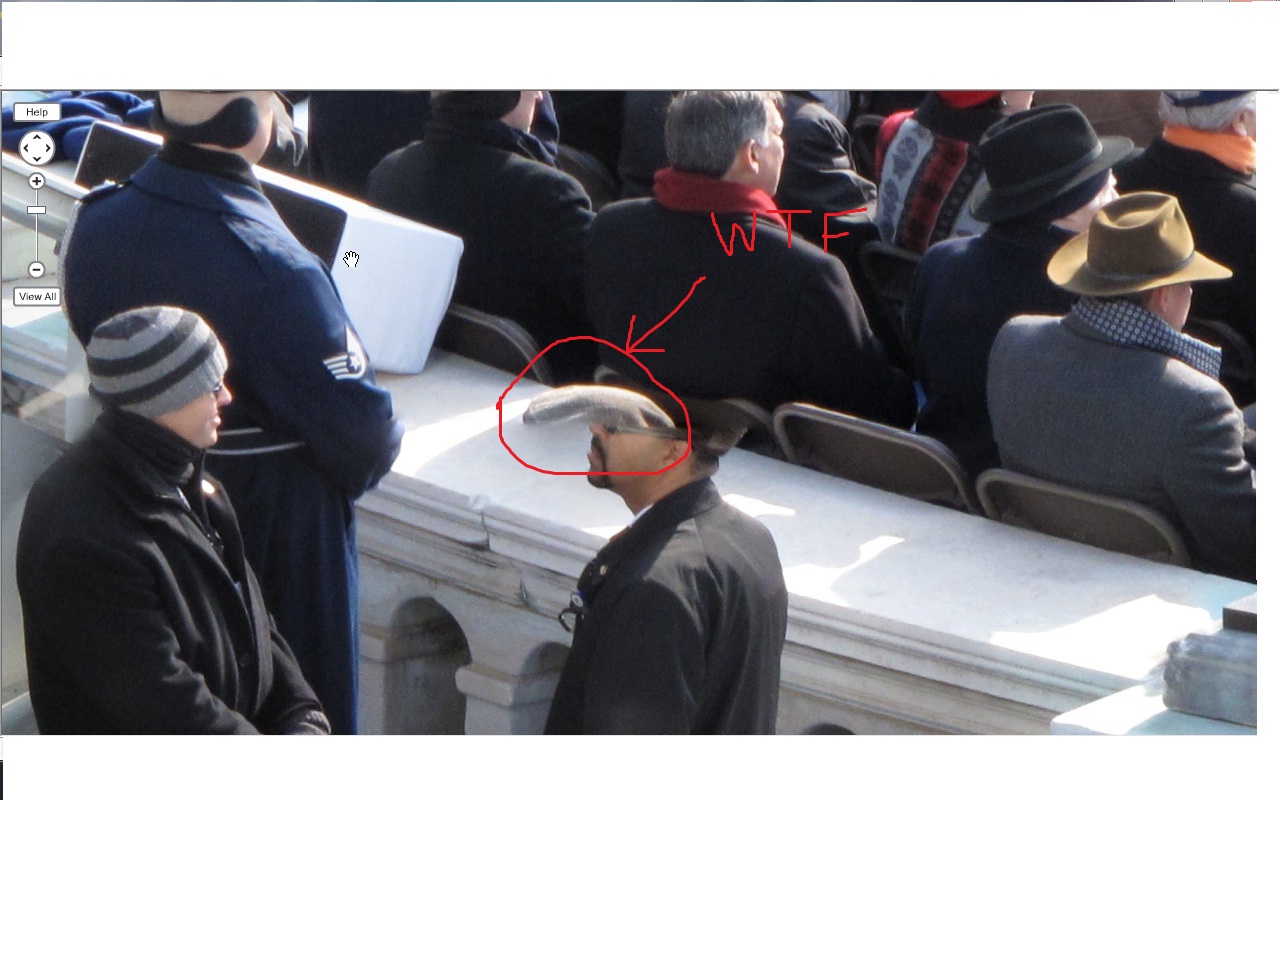 i was looking at a picture of Obama's inauguration and i found something weird. Don't know what  it is but its weird